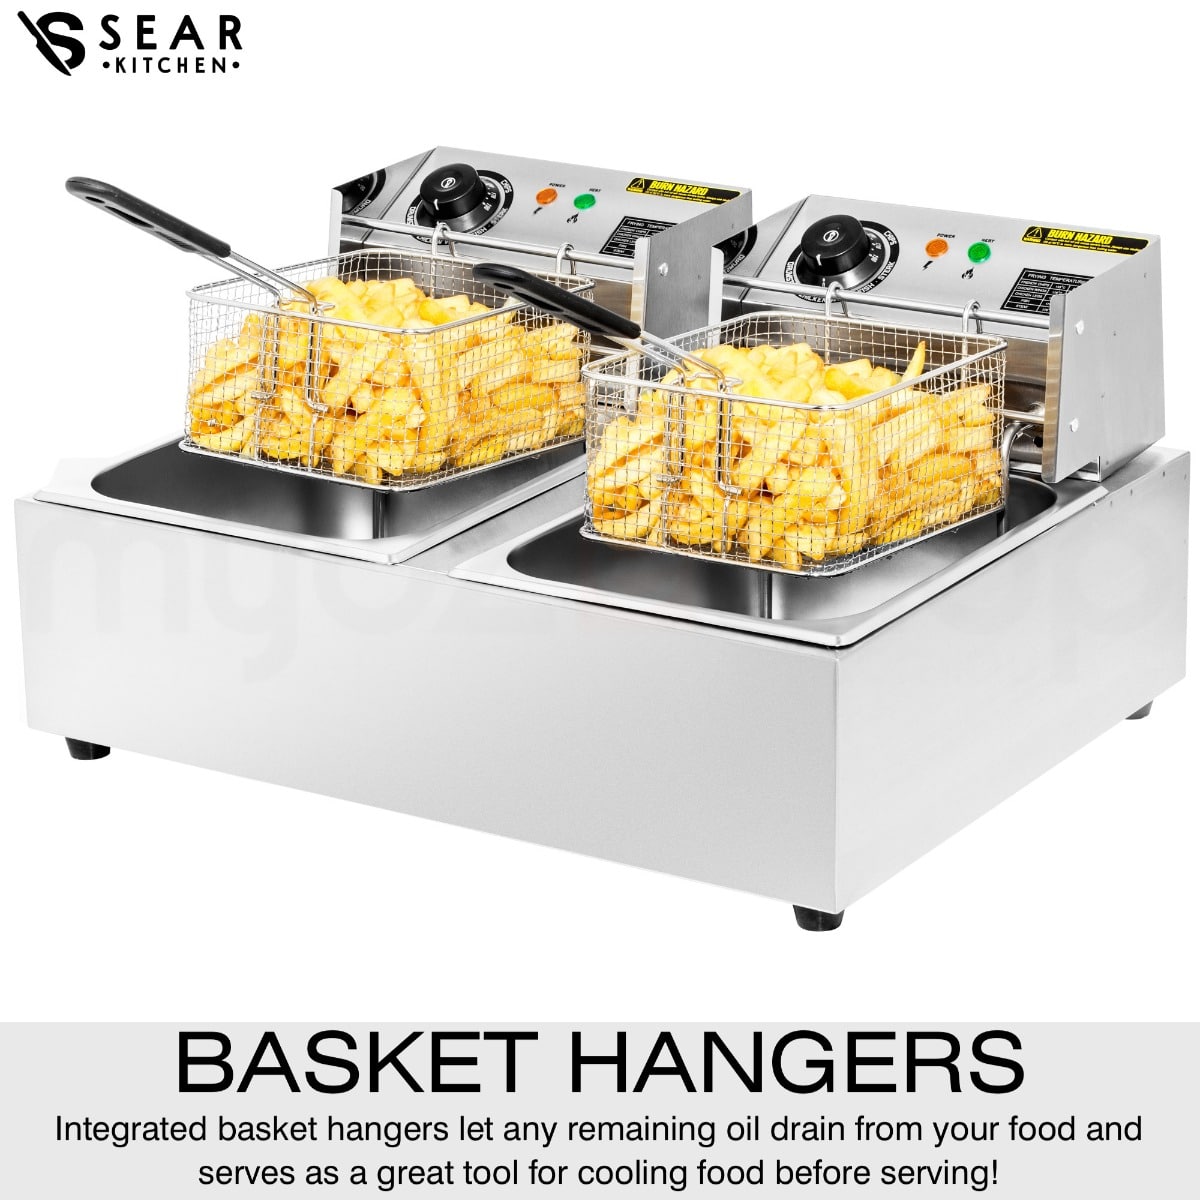 12 Liter Commercial Desk Top Electric Chip Deep Fryer with Double Baskets